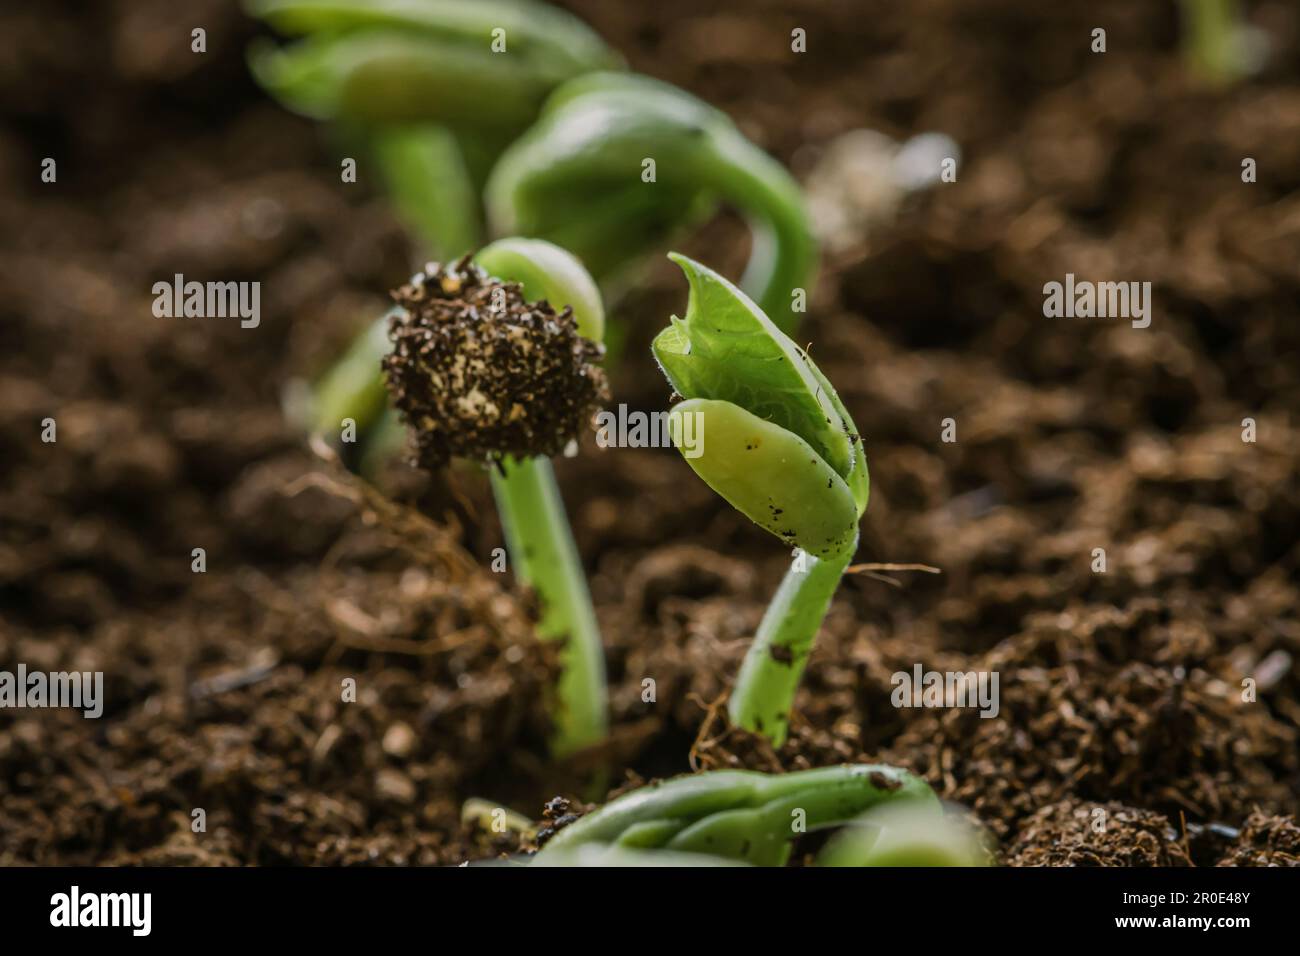 Small fresh green white beans seedlings just sprouted from seeds planted in fertile potting soil, close up Stock Photo